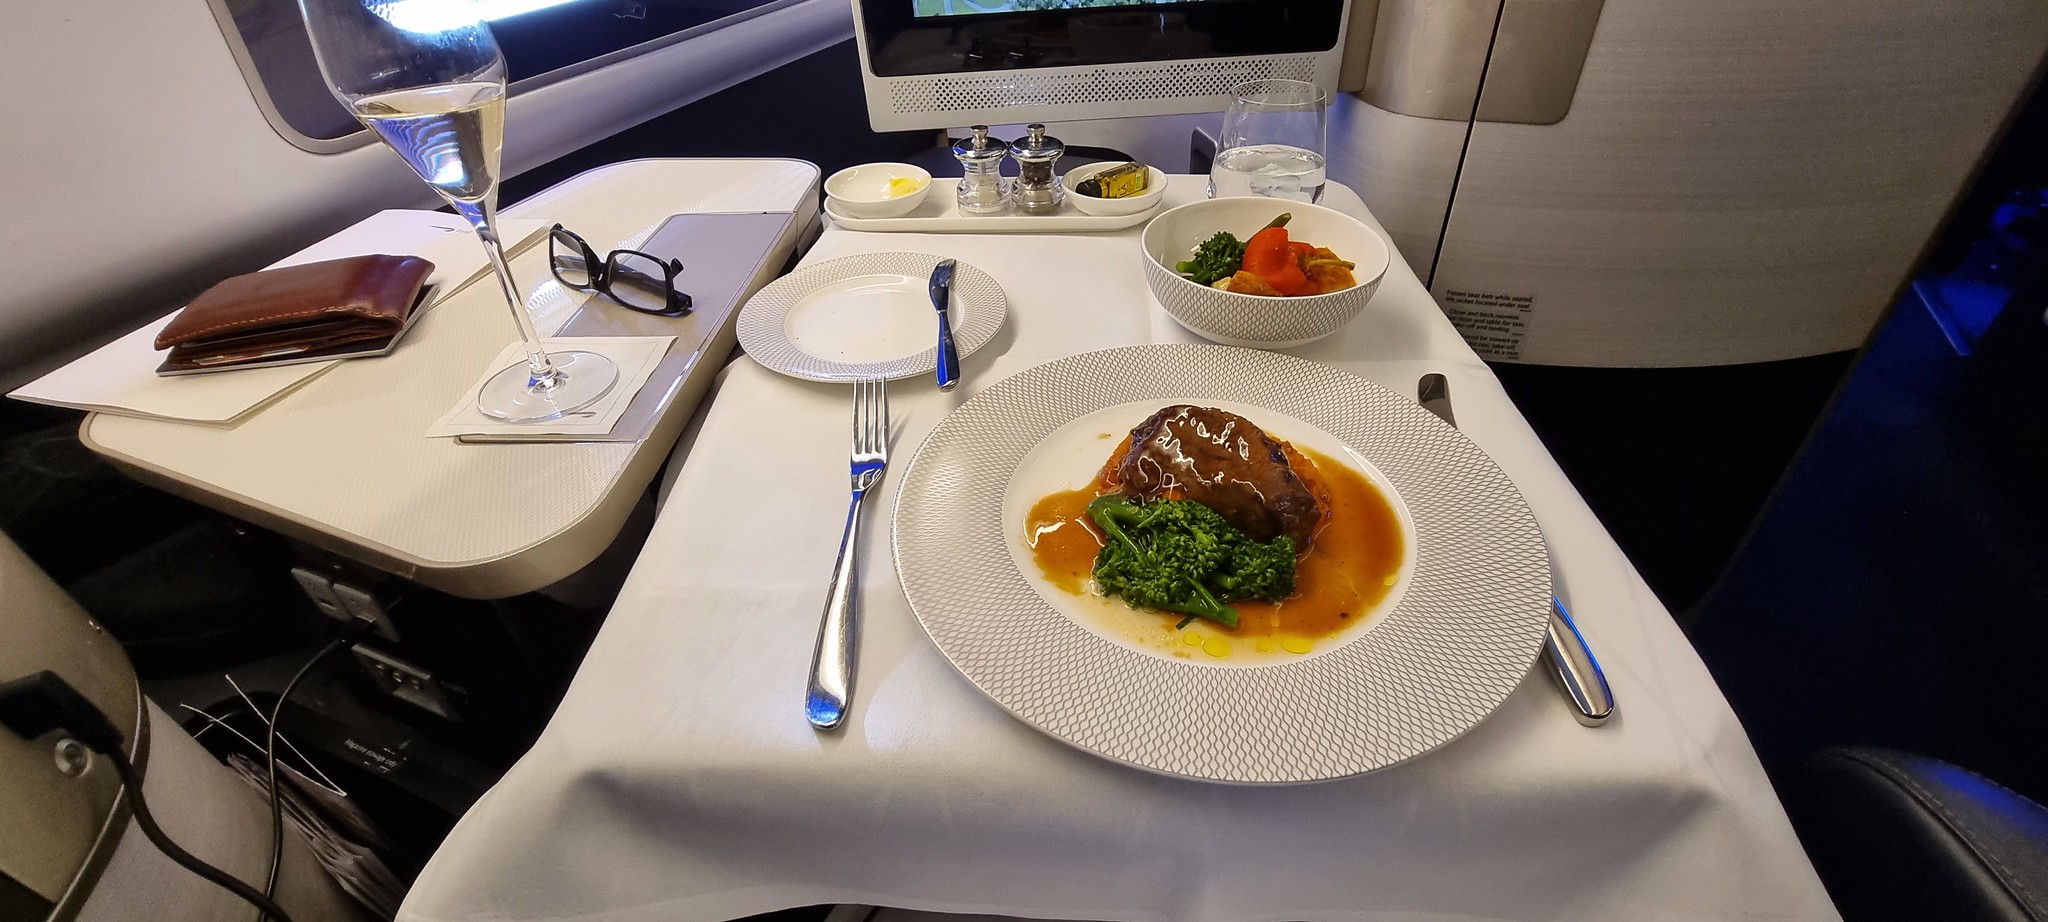 Another beef cheek served on board the BA flight to JFK